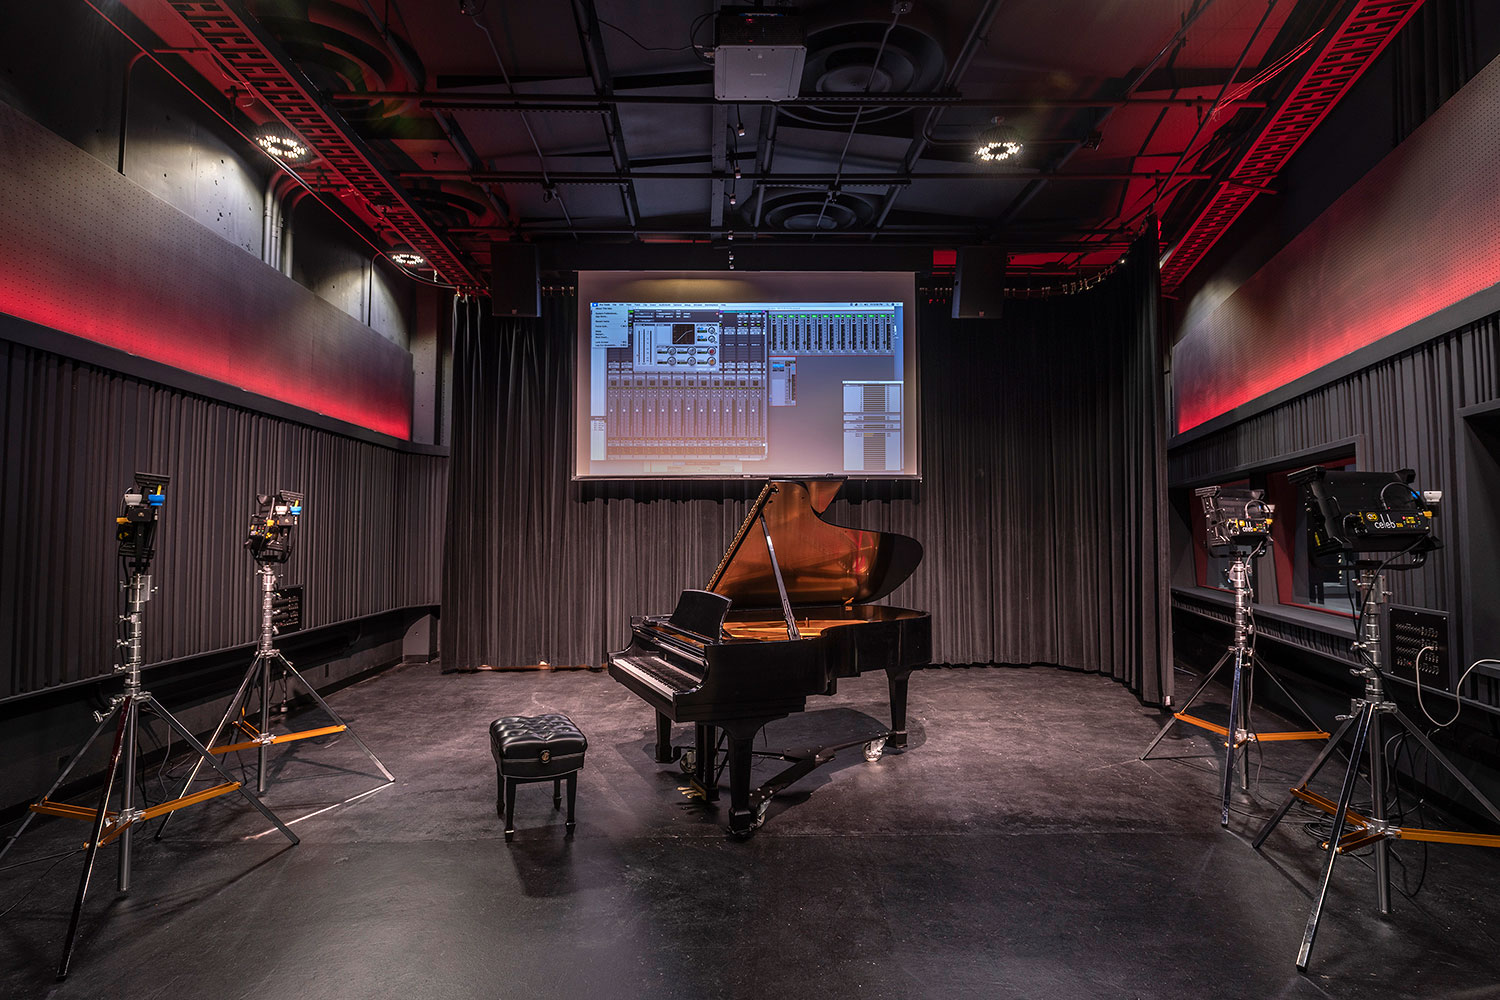 Rensselaer Polytechnic Institute (RPI) brand new state-of-the-art audio production facilities, designed by WSDG - Live Room featuring Grand Piano and Film Scoring Screen.